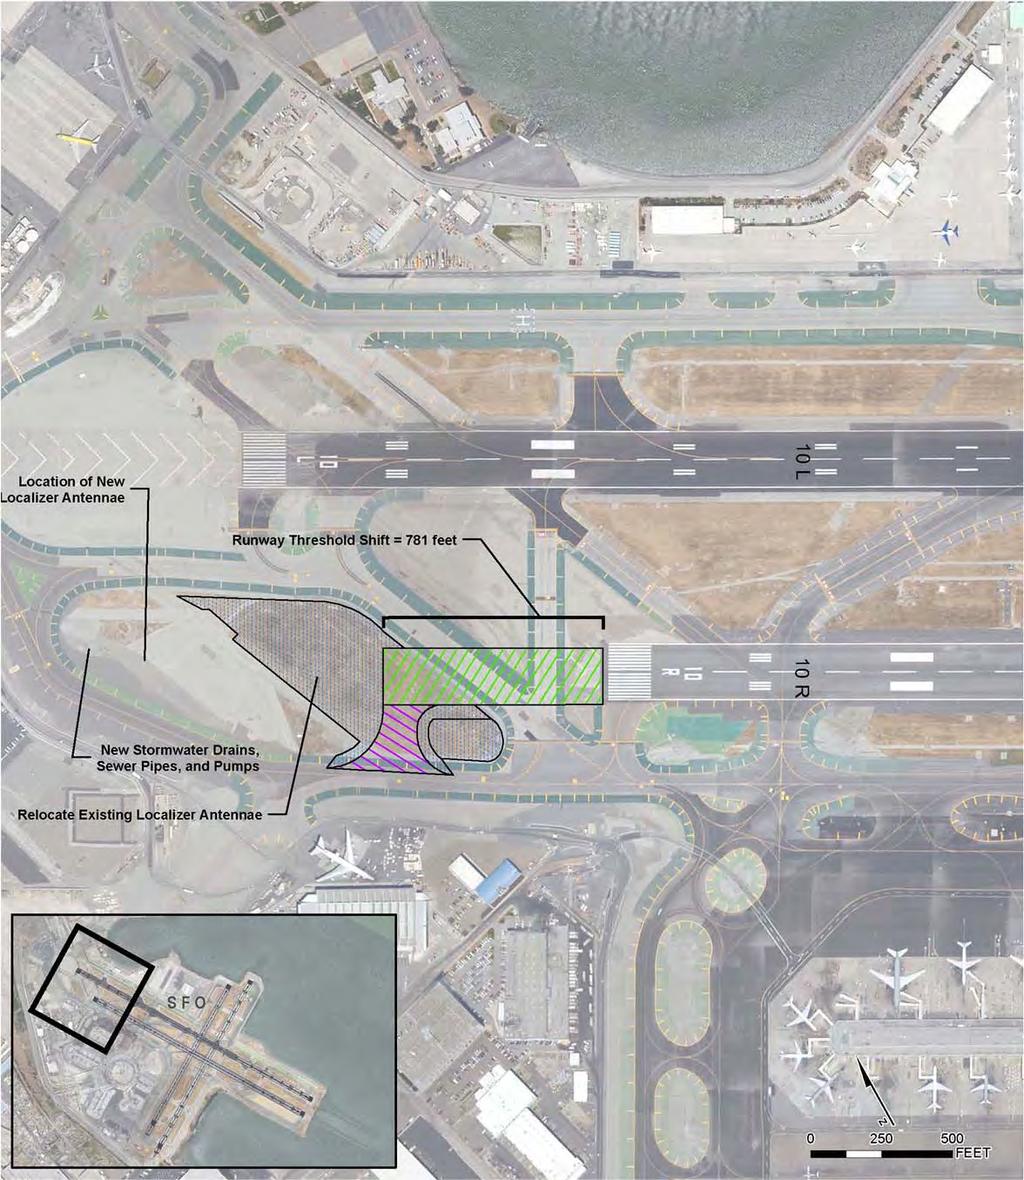 Runways 10-28 Proposed project components include: Runway 10R